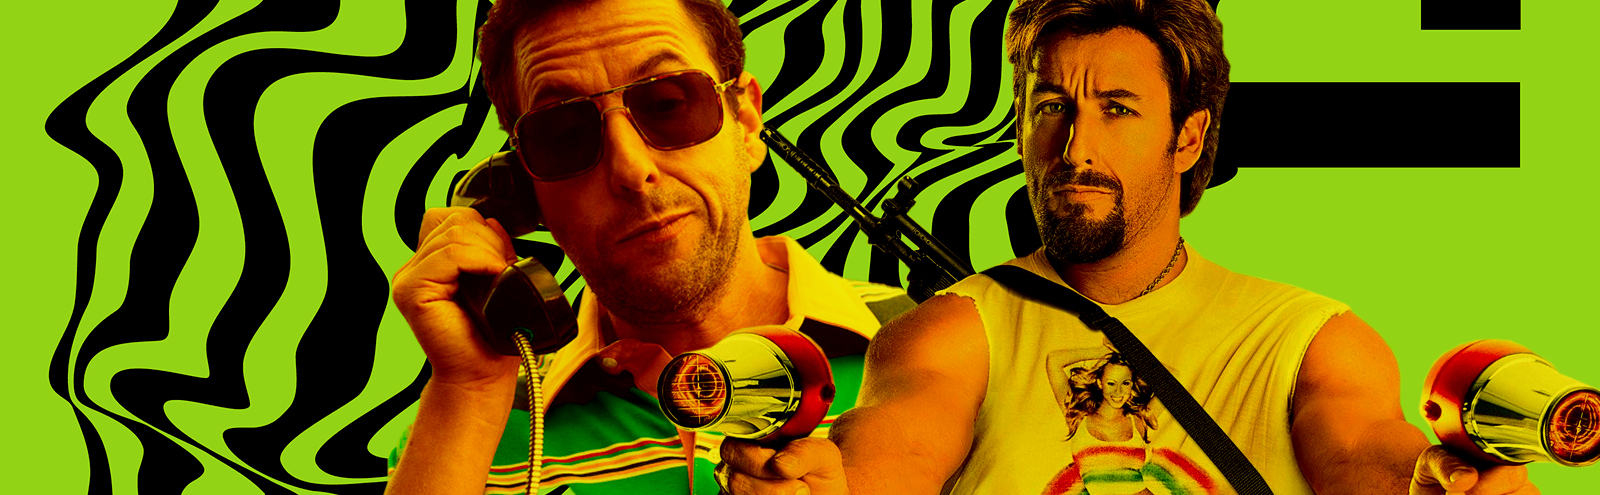 Adam Sandler's 15 Most Successful Movies, Ranked According To Box